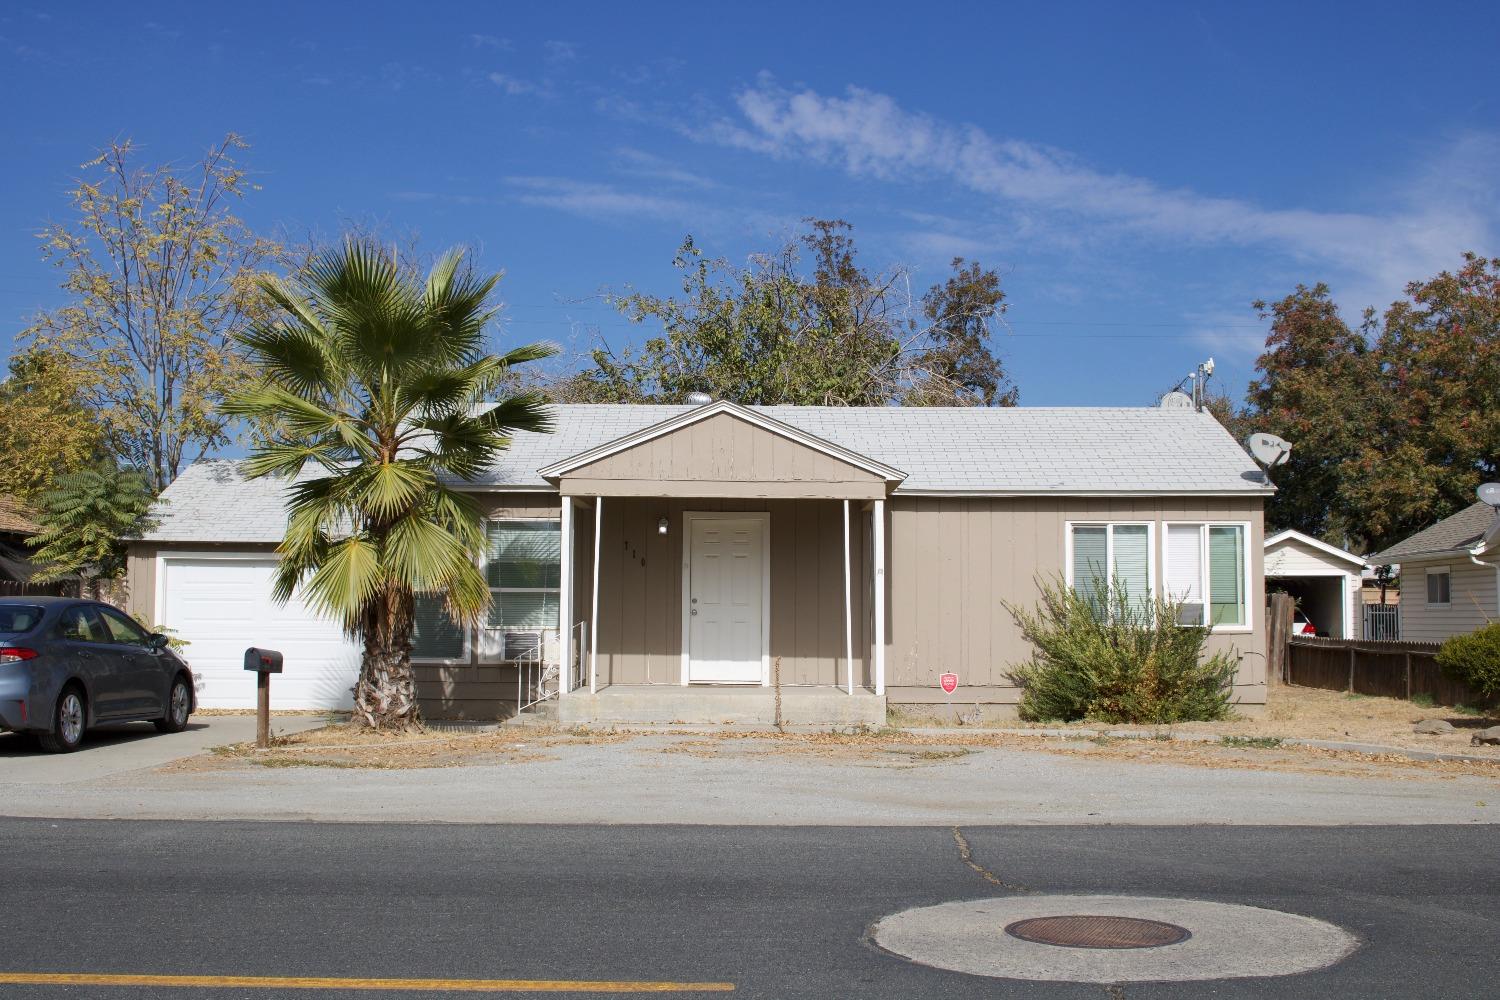 Photo of 710 E Ivy St in Hanford, CA